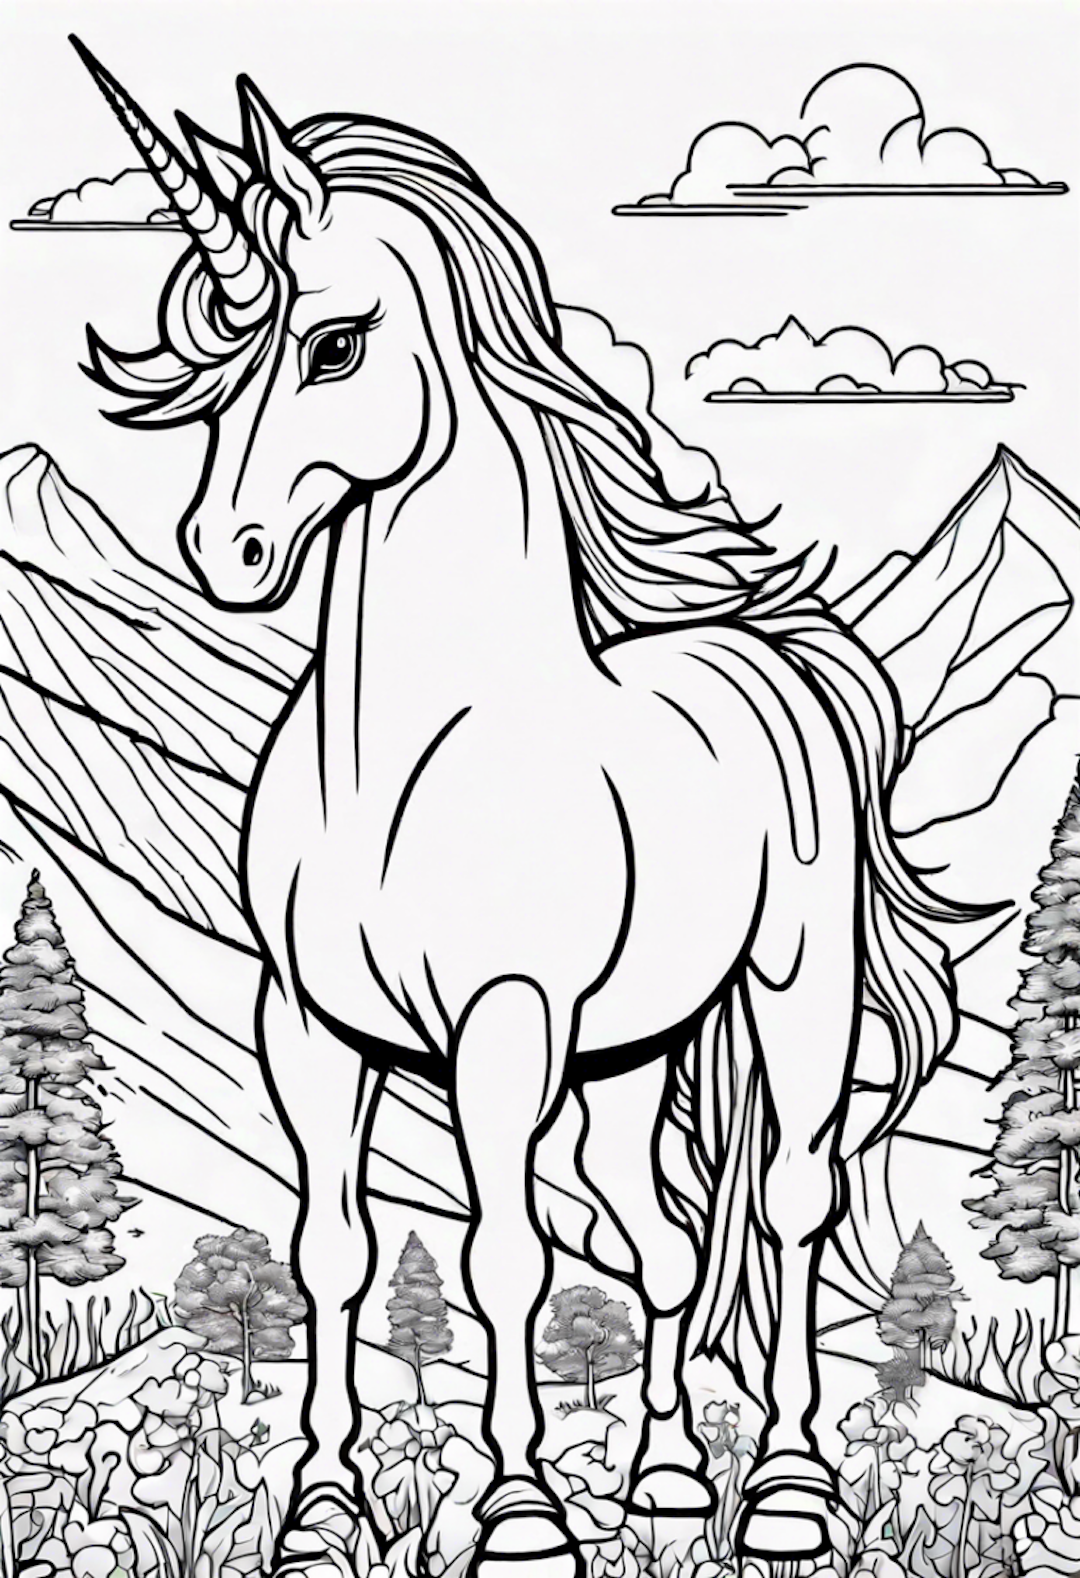 Majestic Unicorn in the Enchanted Mountains Coloring Page coloring pages